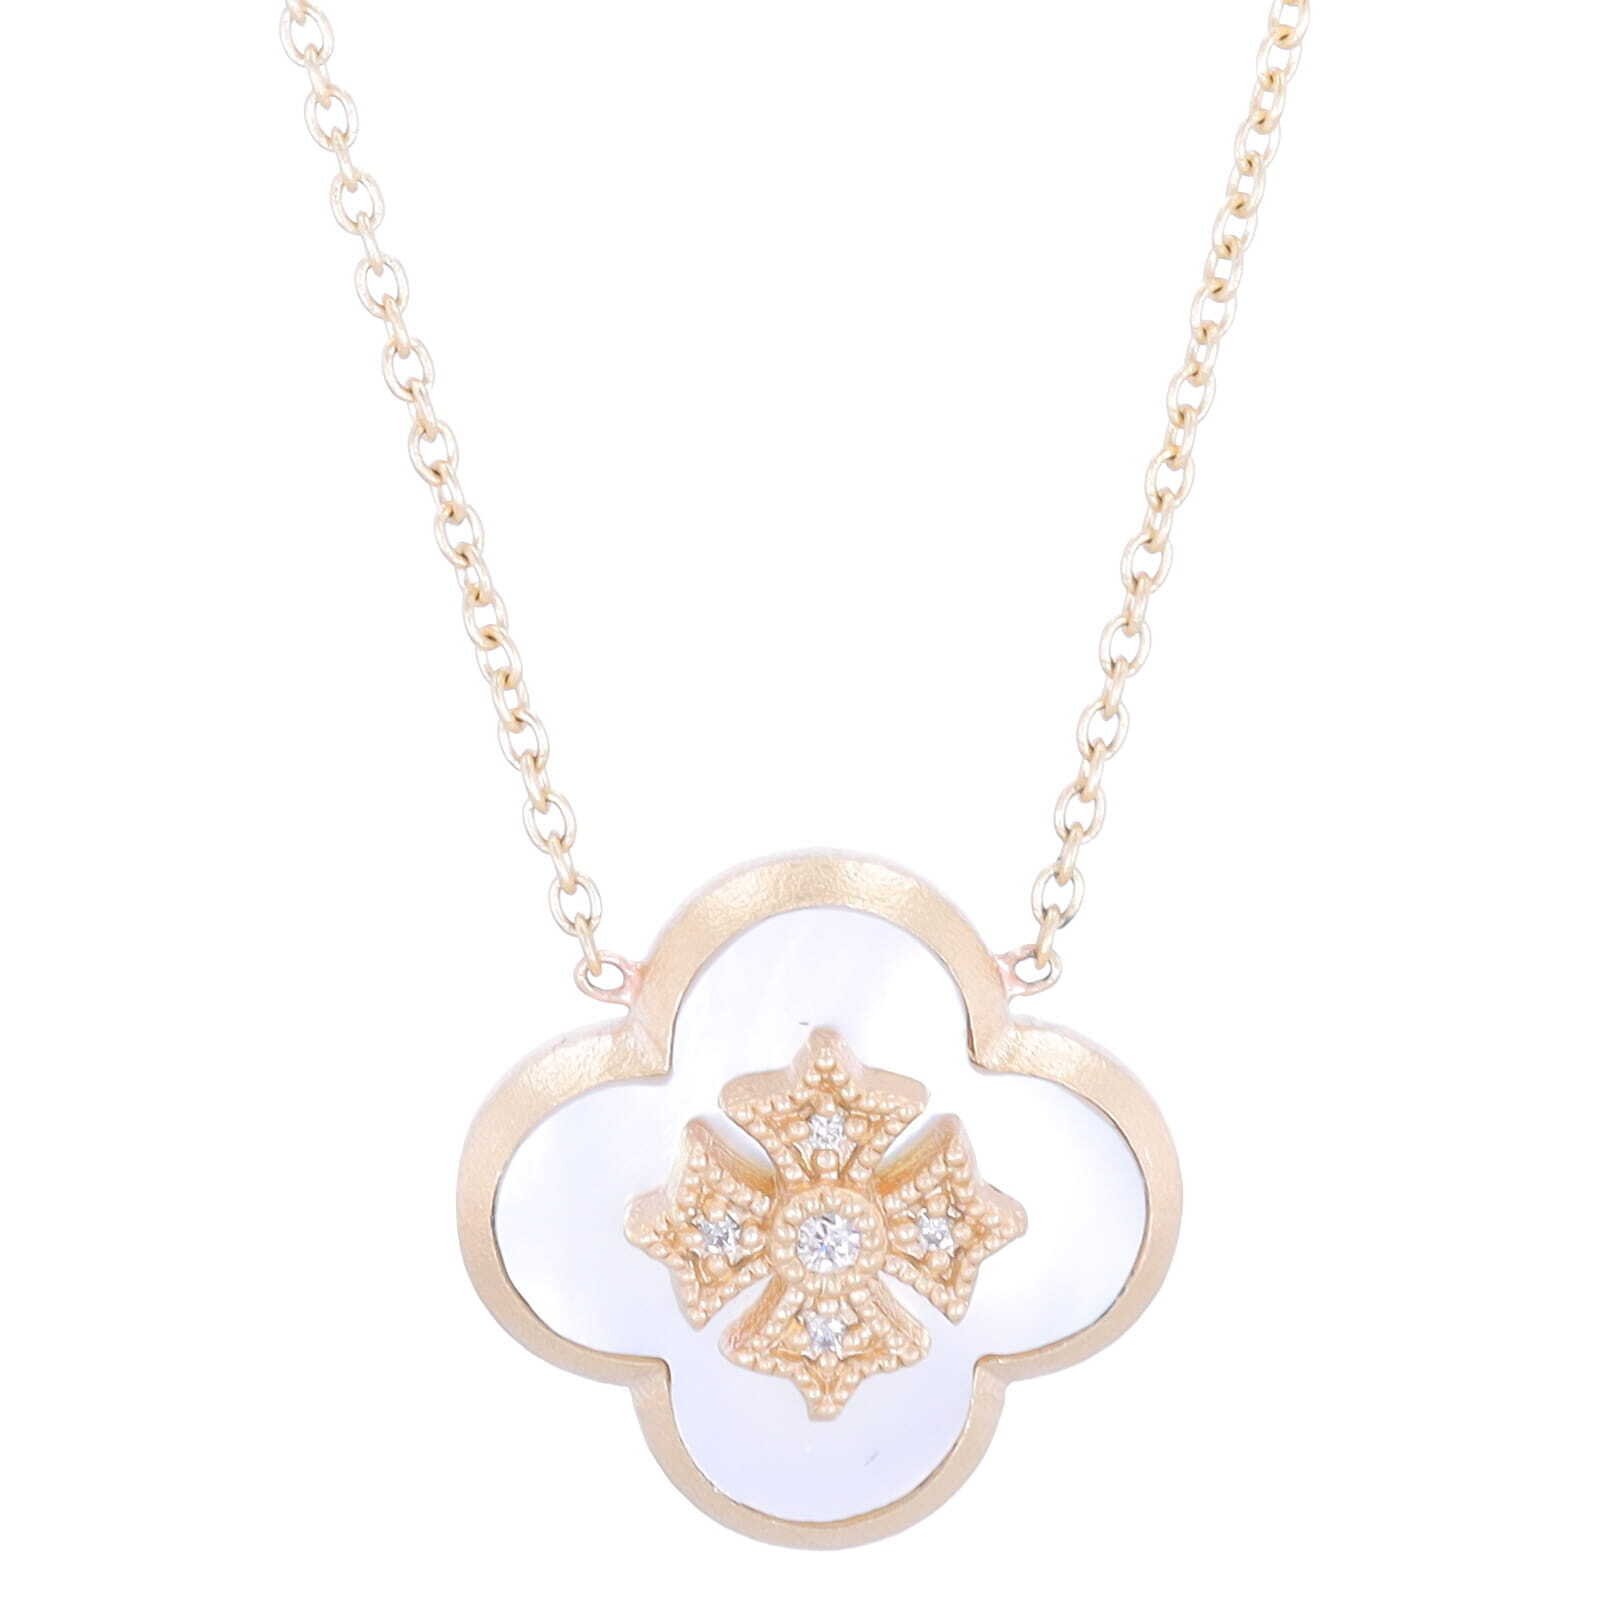 18" 14k Satin Finish Yellow Gold Pendant Necklace with Mother Of Pearl Clover and Diamond Maltese Cross